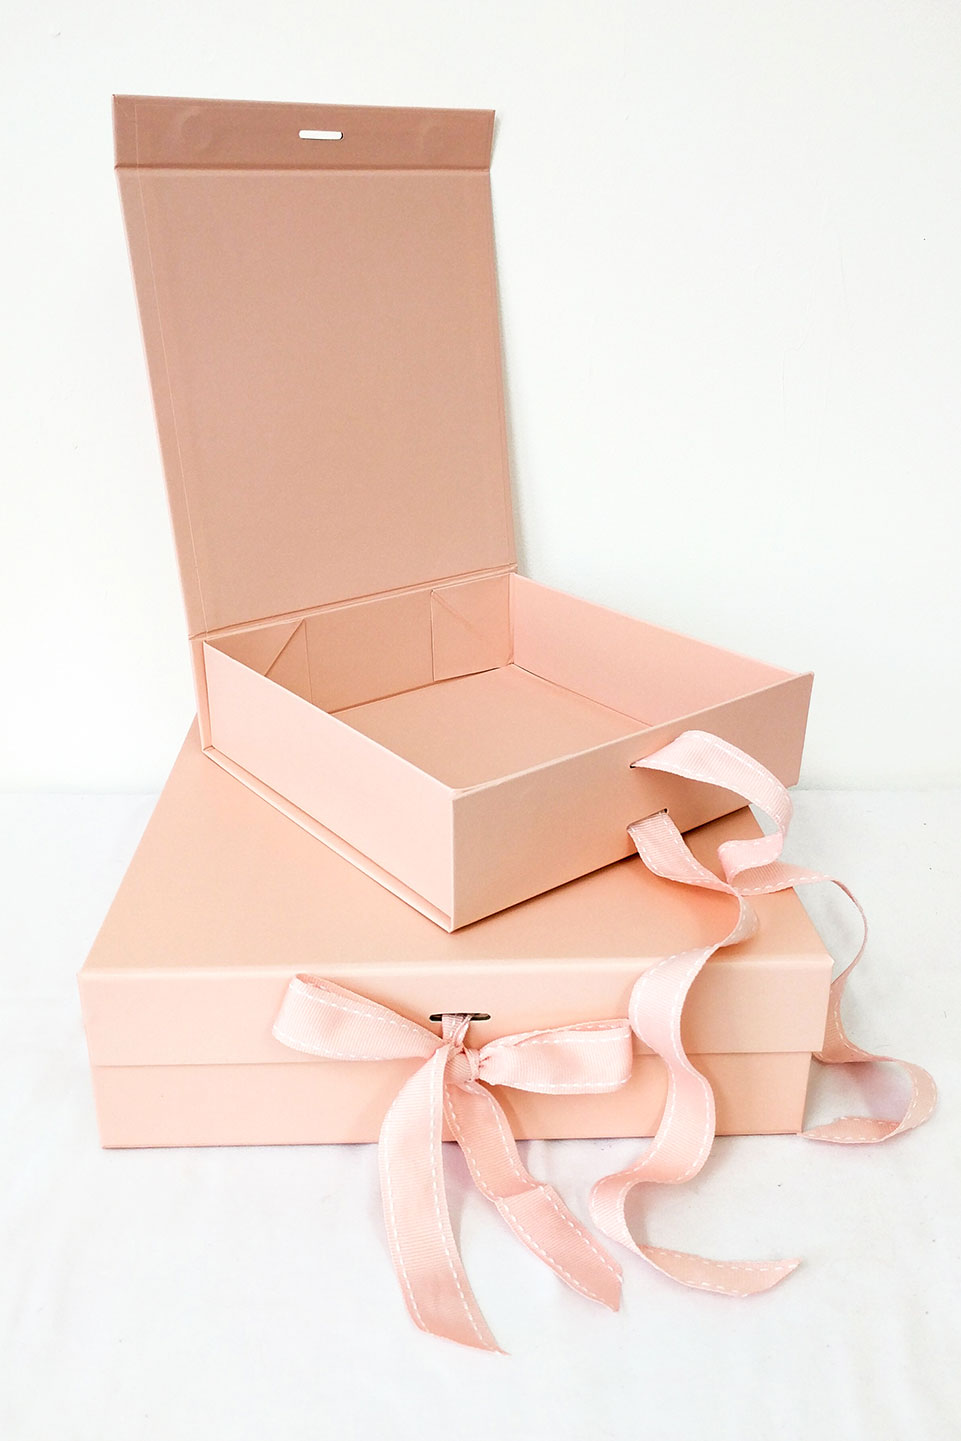 Pink lingerie gift box with bows for underwear sets